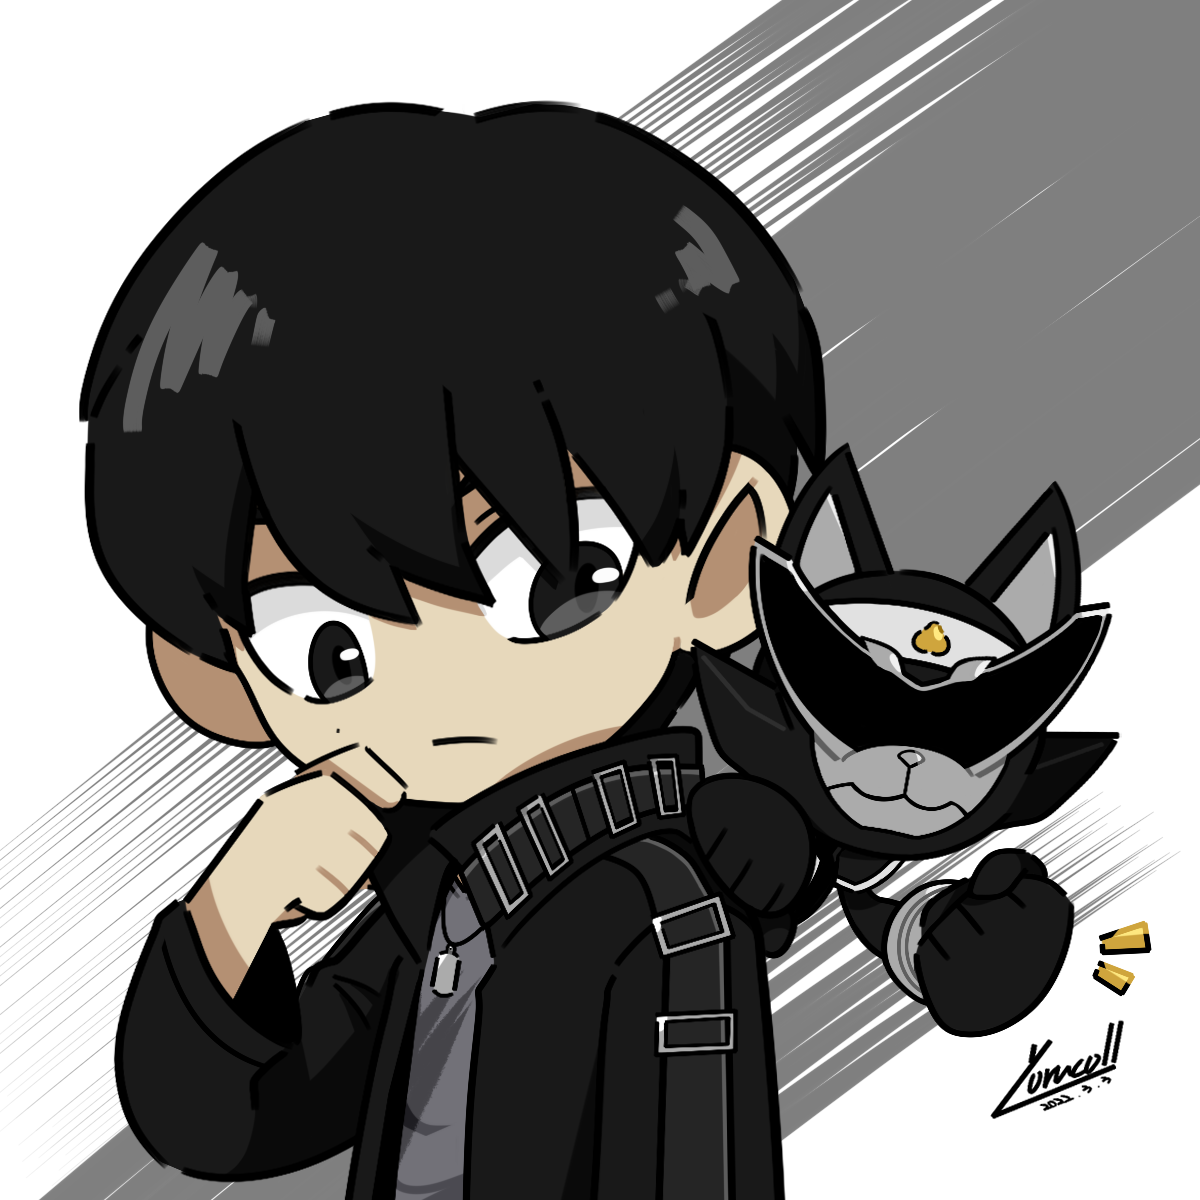 Inu Brother by Yorucoll on DeviantArt